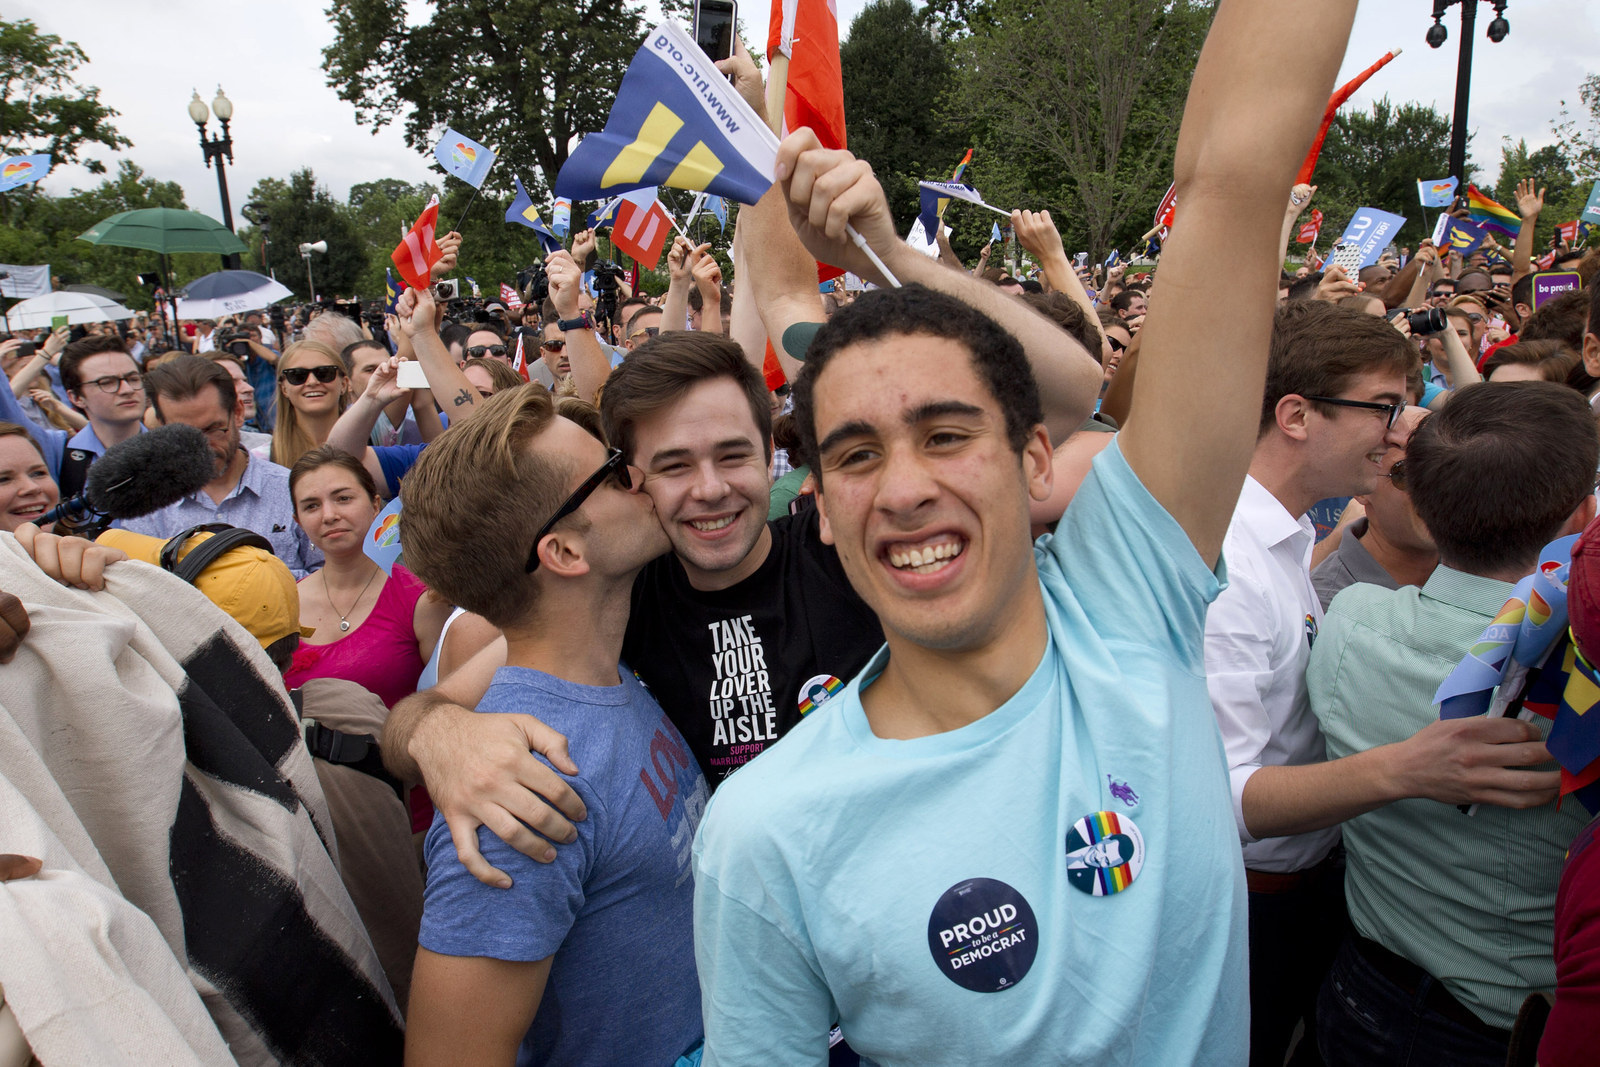 Celebratory And Emotional Photos From The Supreme Court After Pro Marriage Equality Ruling